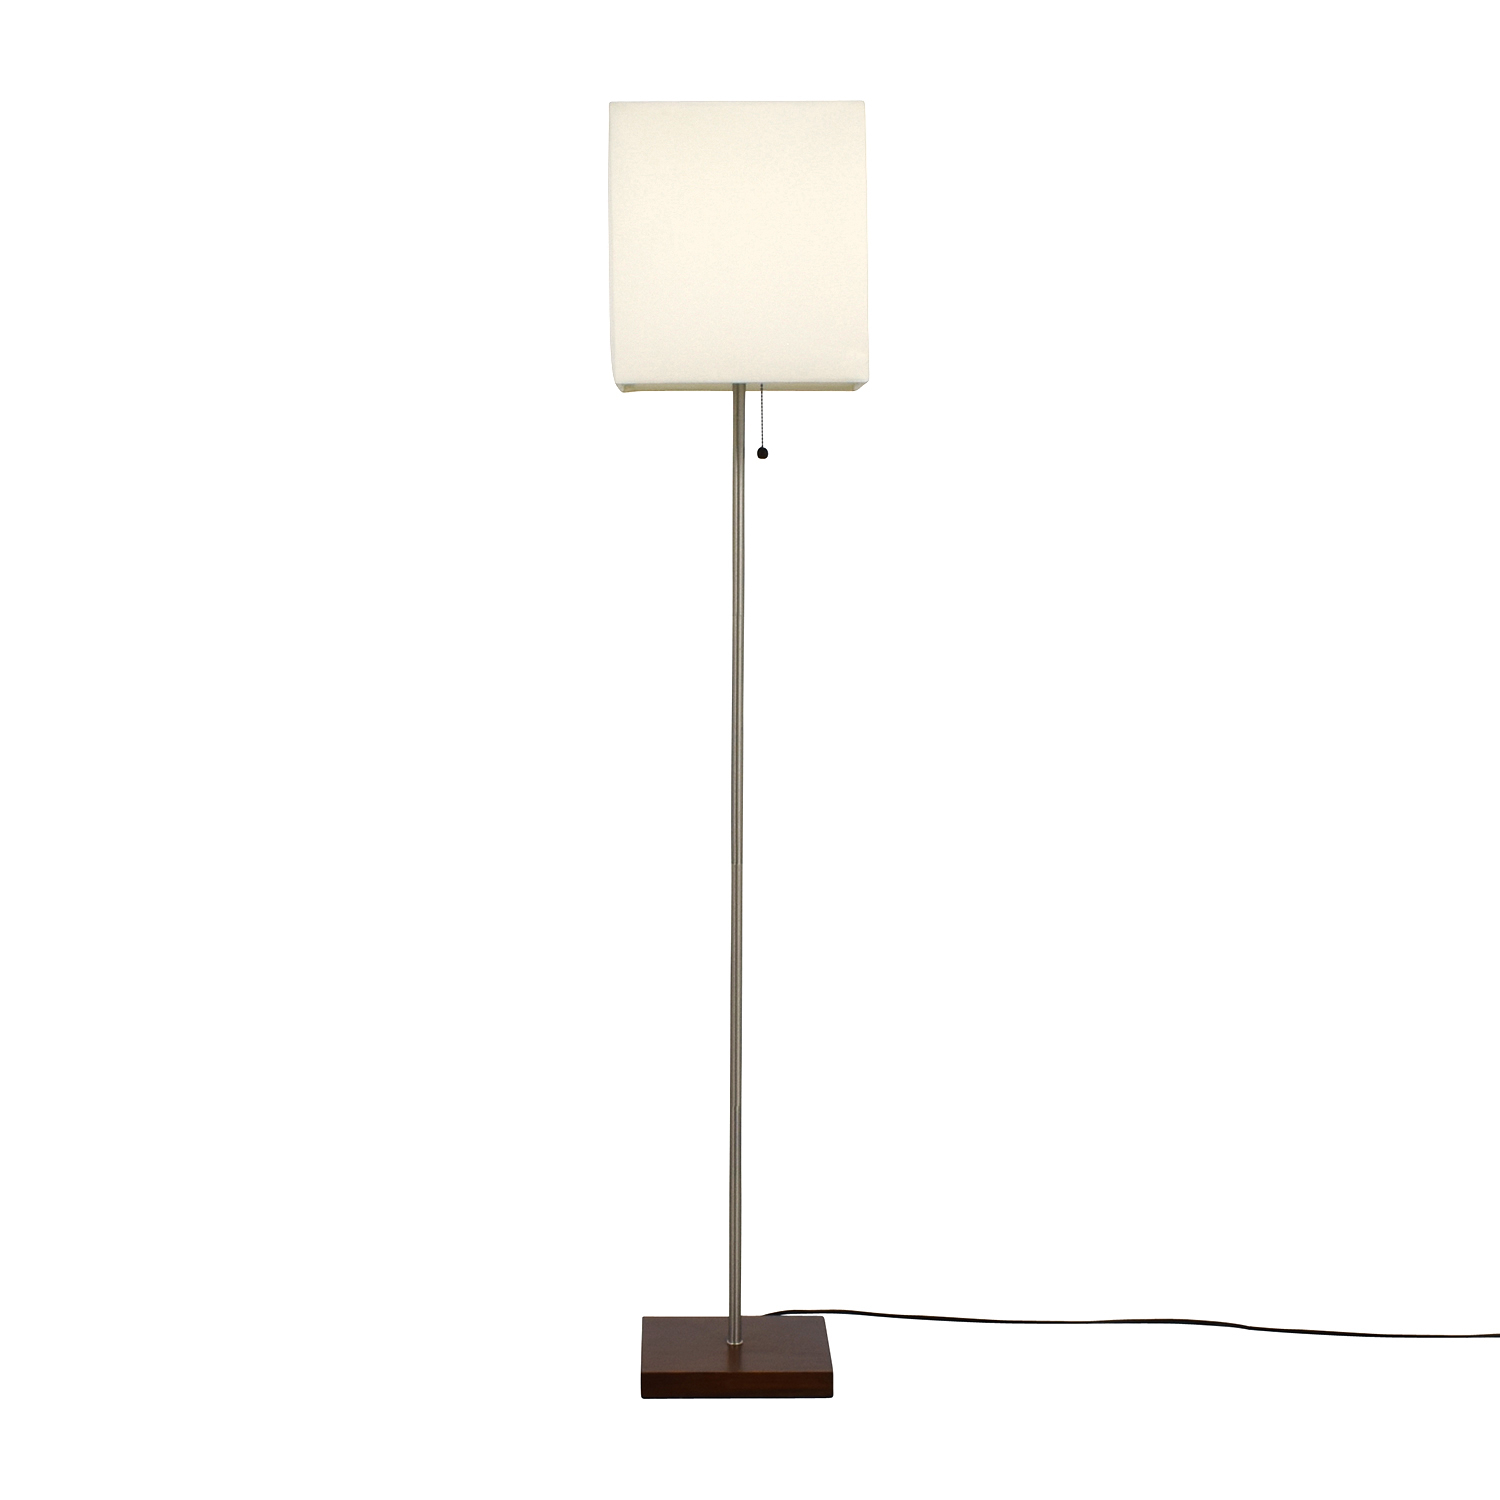 25 Off Target Target Classic Silver Floor Lamp Decor within sizing 1500 X 1500